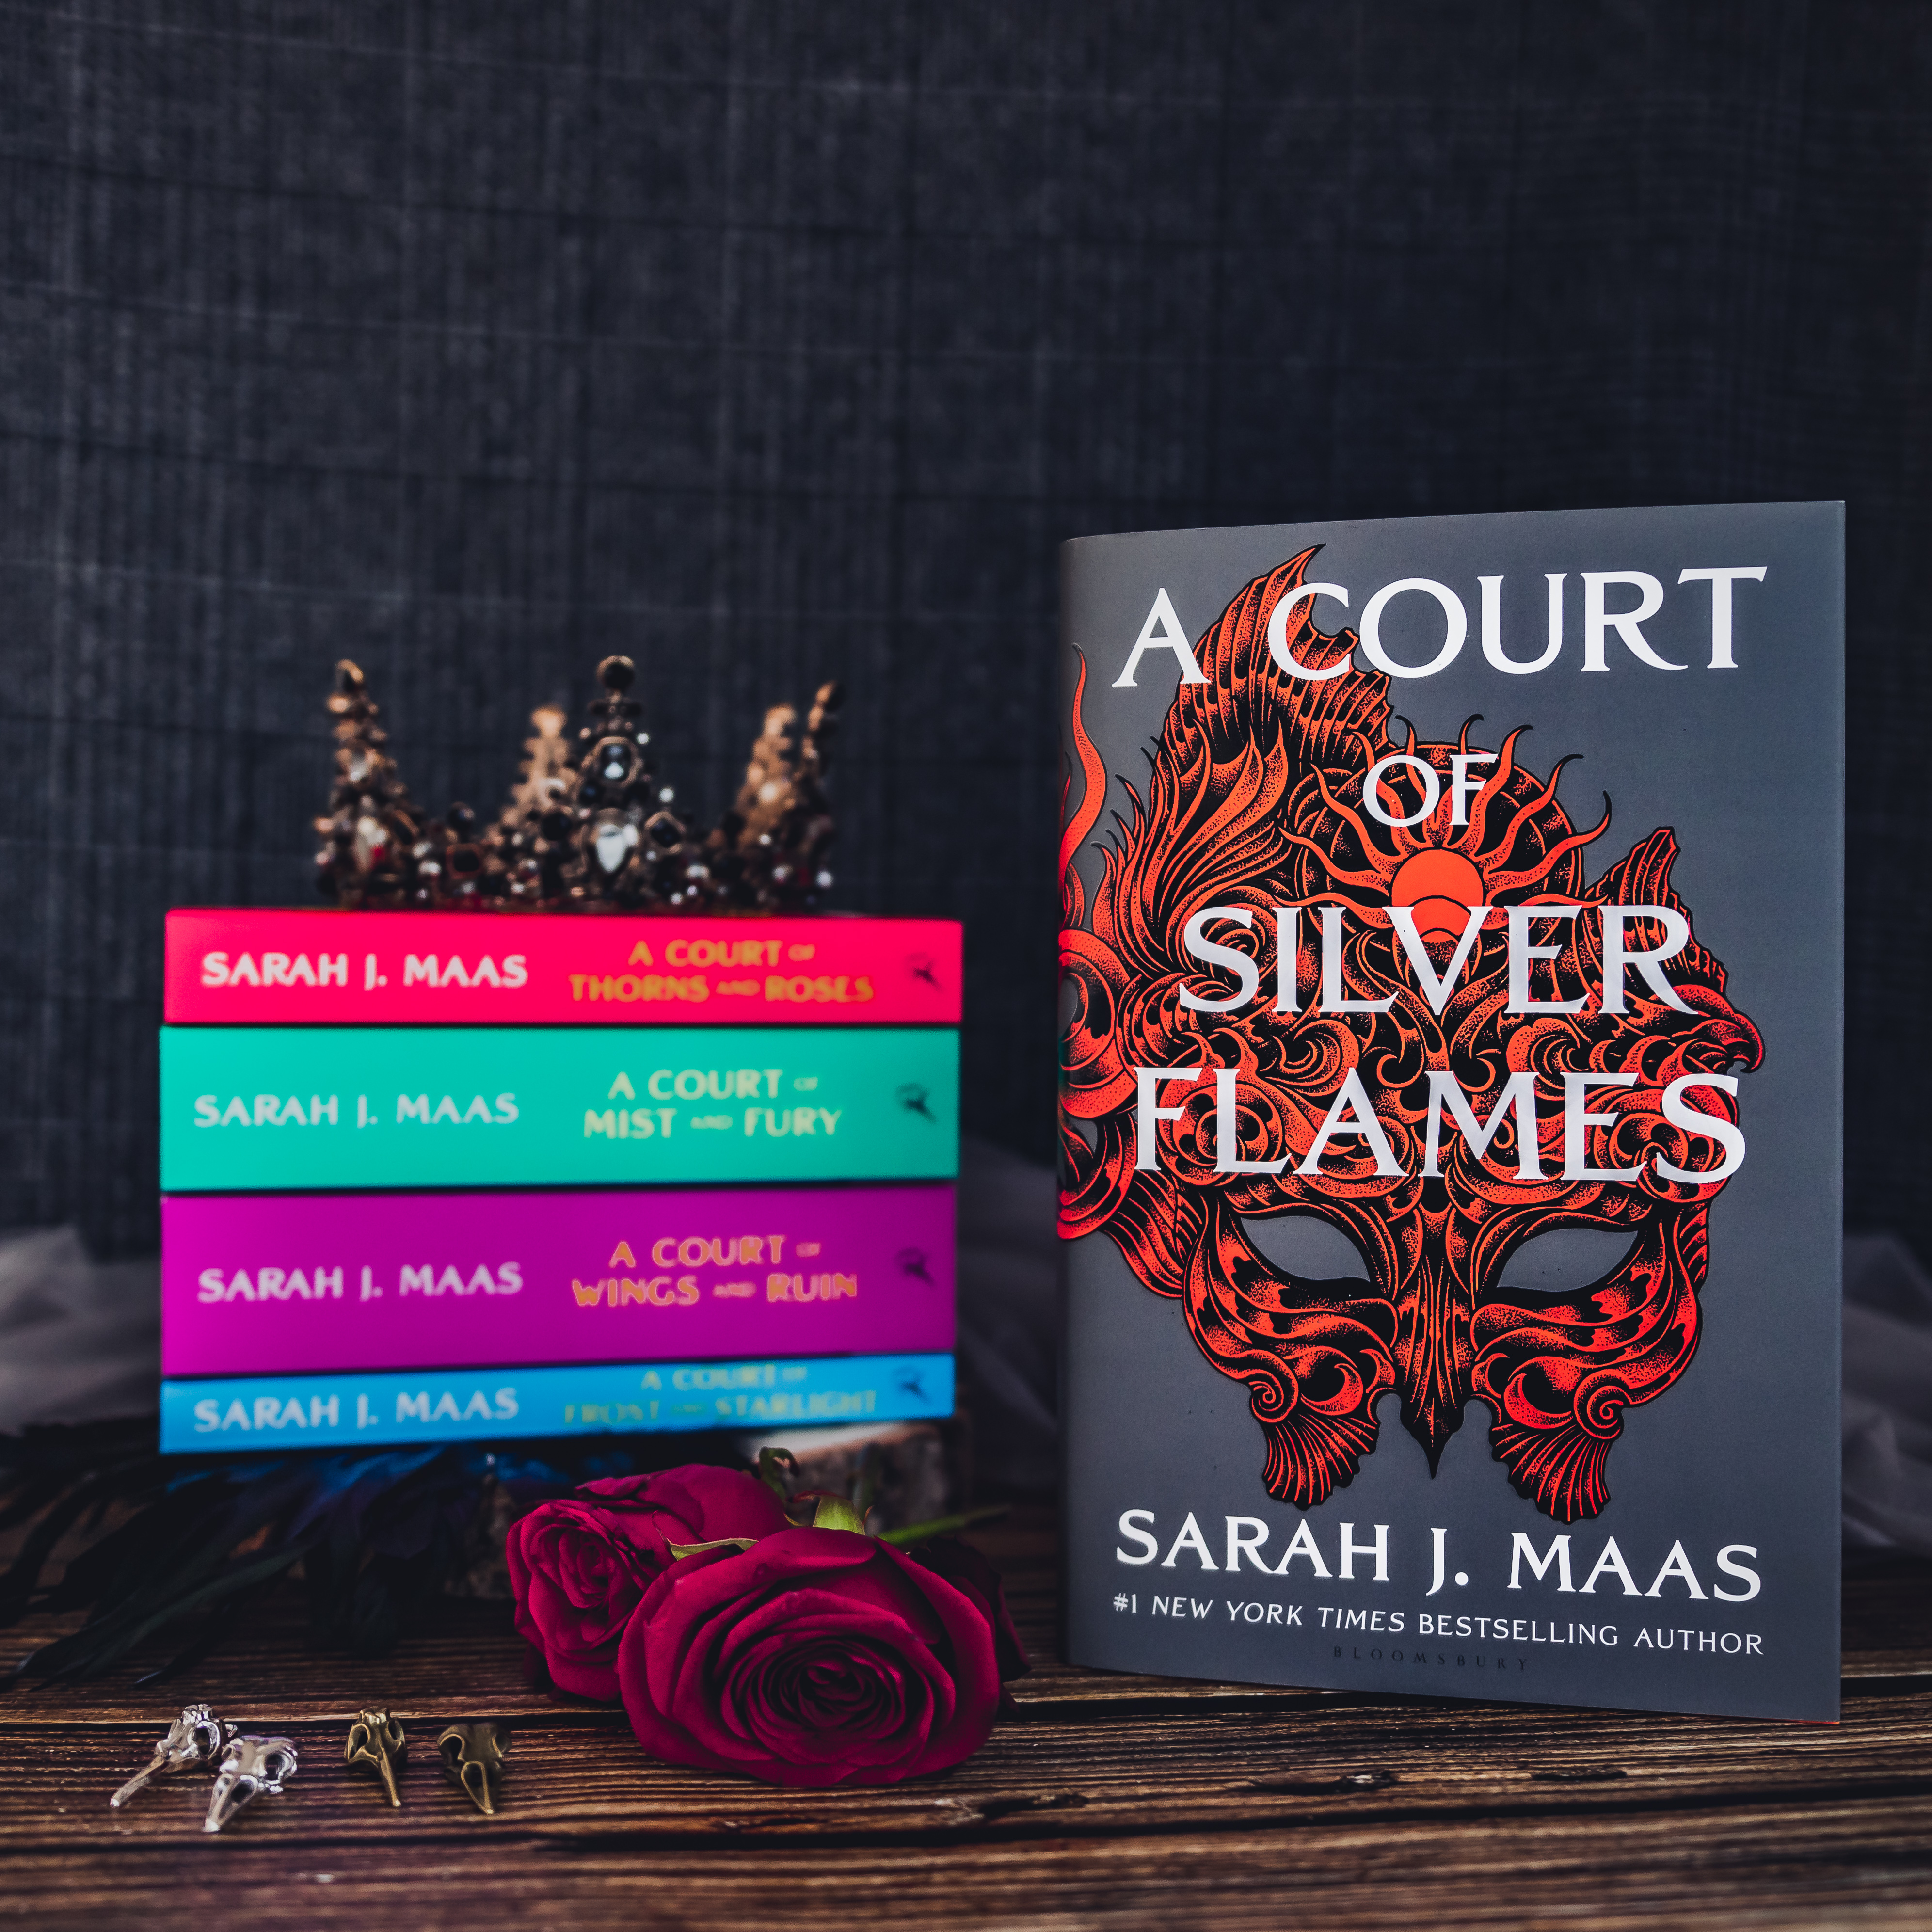 A number of books by Sarah J Maas